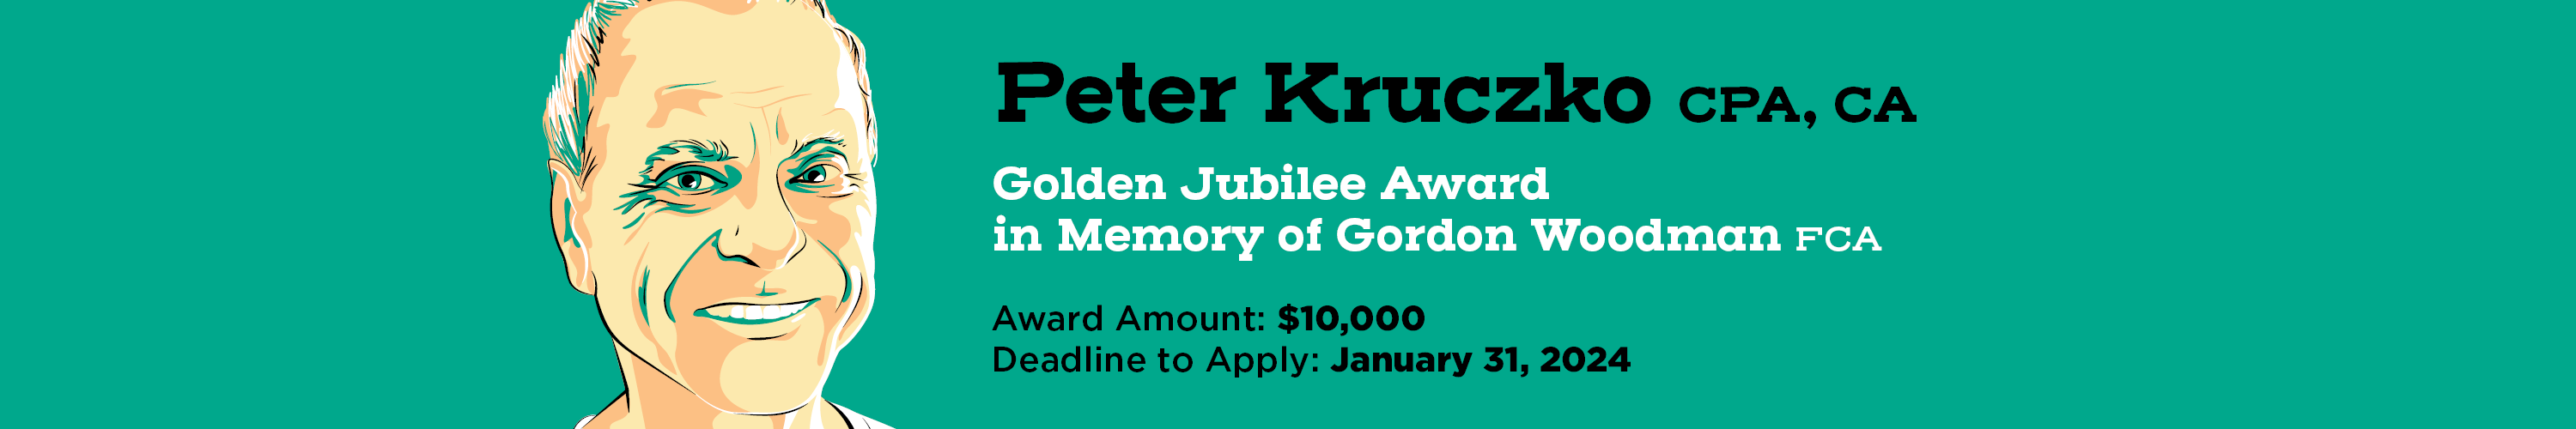 Illustration of a smiling, older male face. Text reads "Peter Kruczko CPA, CA Golden Jubilee Award in Memory of Gordon Woodman FCA. Award Amount: $10,000. Deadline to apply: January 31, 2024."